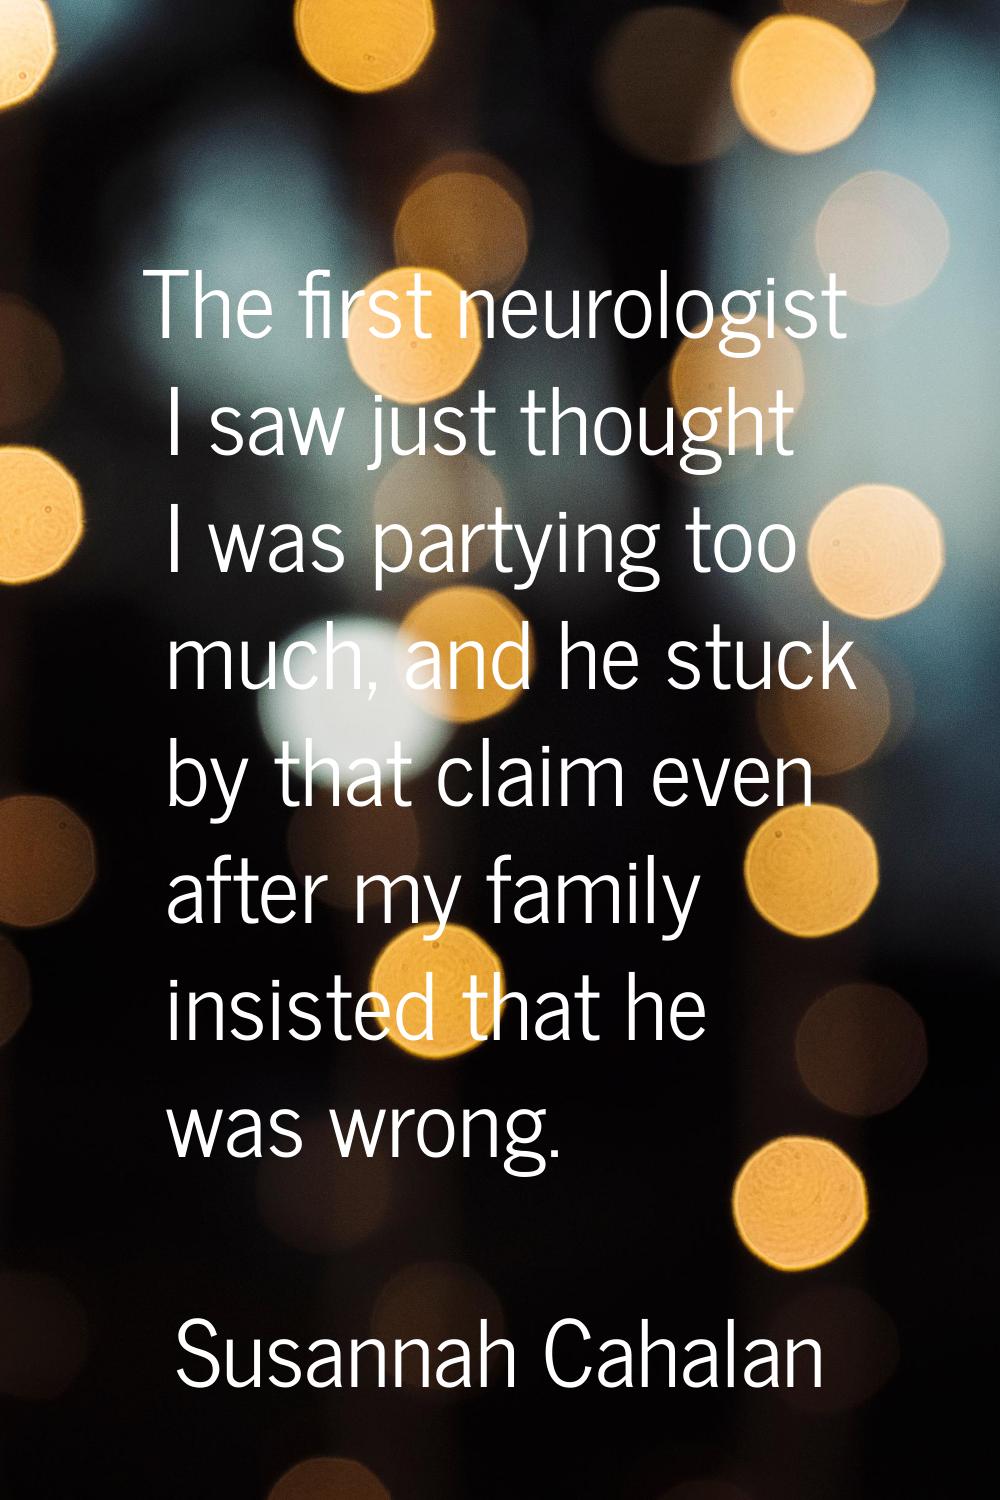 The first neurologist I saw just thought I was partying too much, and he stuck by that claim even a